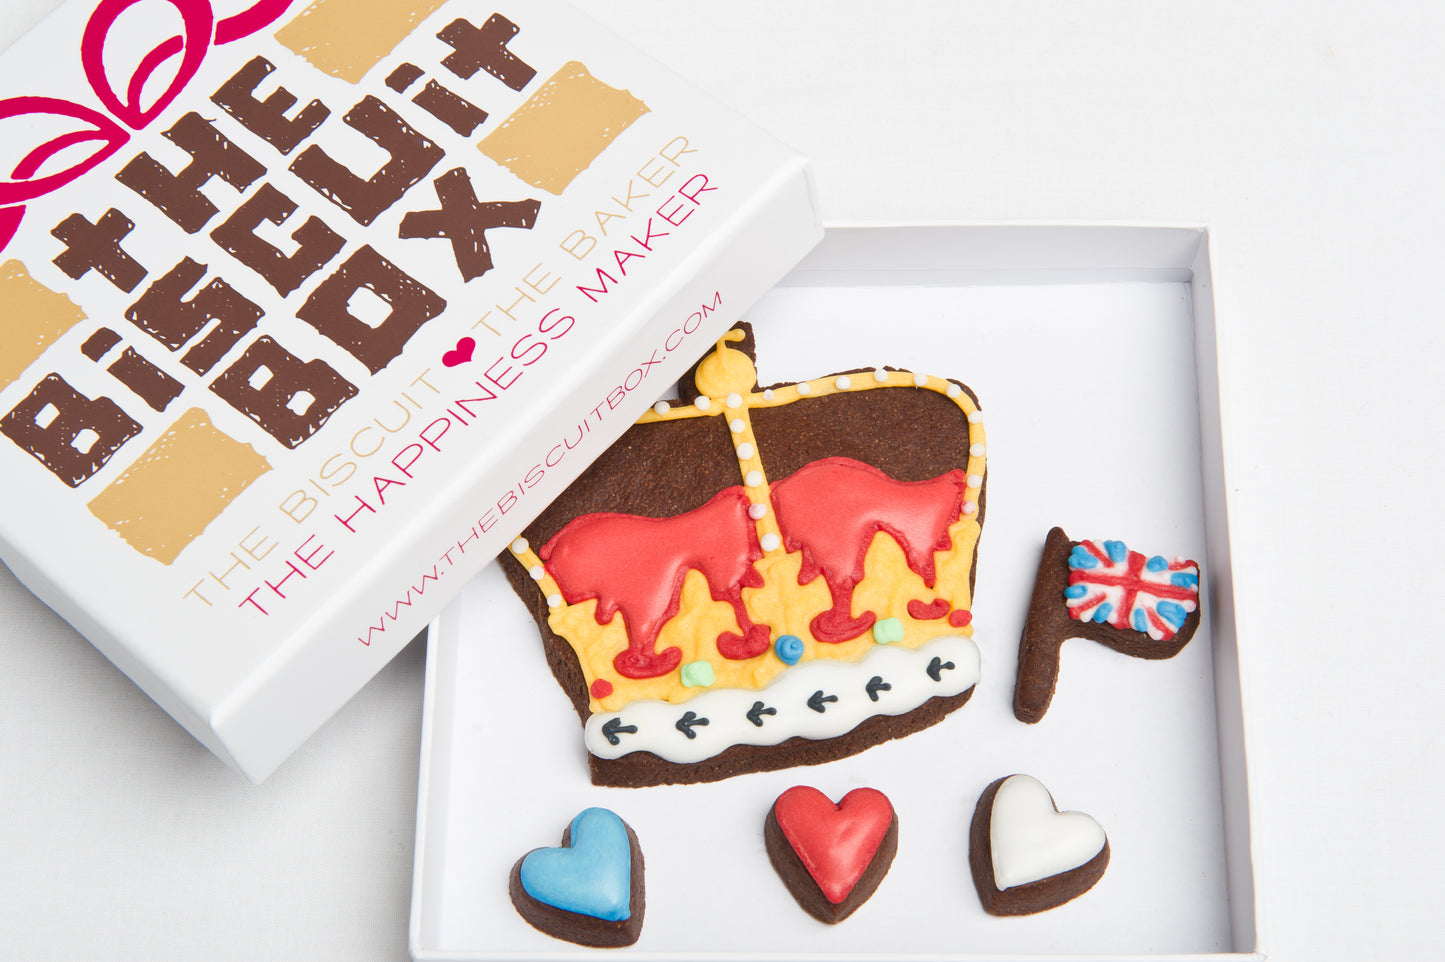 crown cookie with red and blue heart biscuits in a box that will fit through a letterbox.